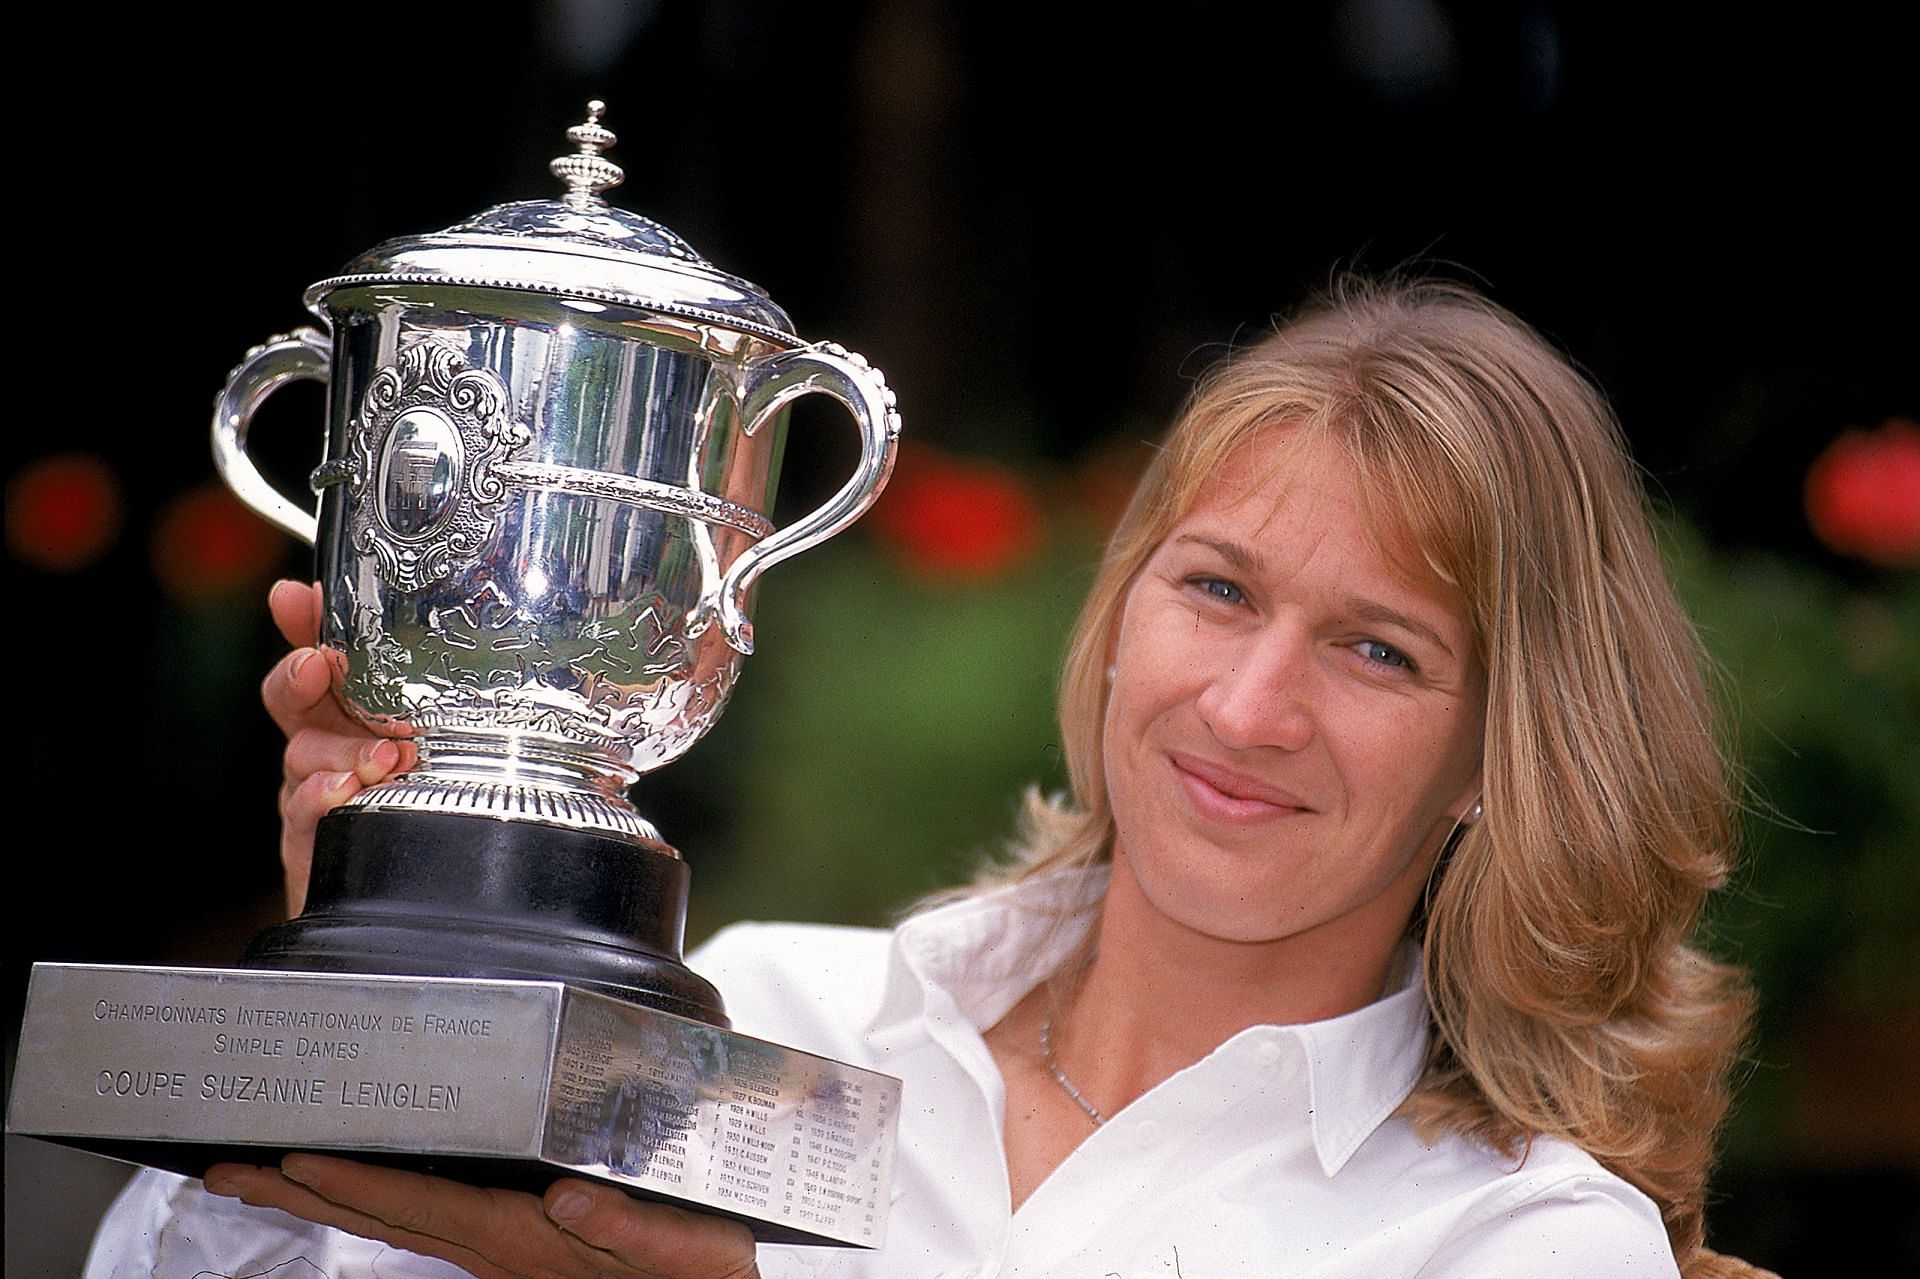 Steffi Graf won her sixth French Open title in 1999